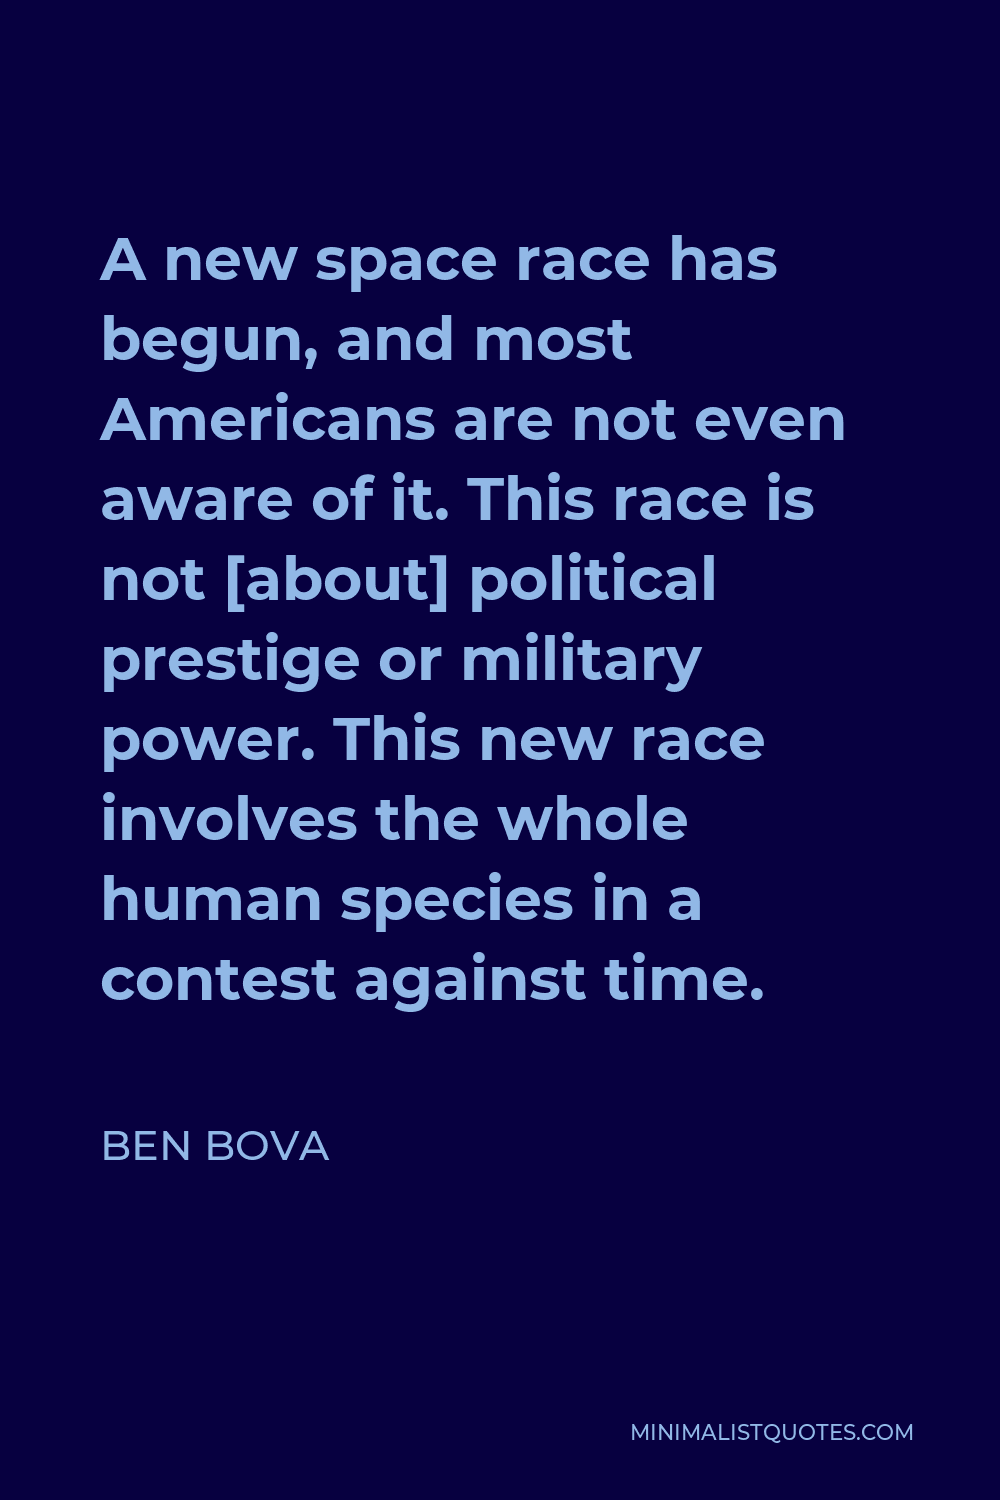 Ben Bova Quote - A new space race has begun, and most Americans are not even aware of it. This race is not [about] political prestige or military power. This new race involves the whole human species in a contest against time.